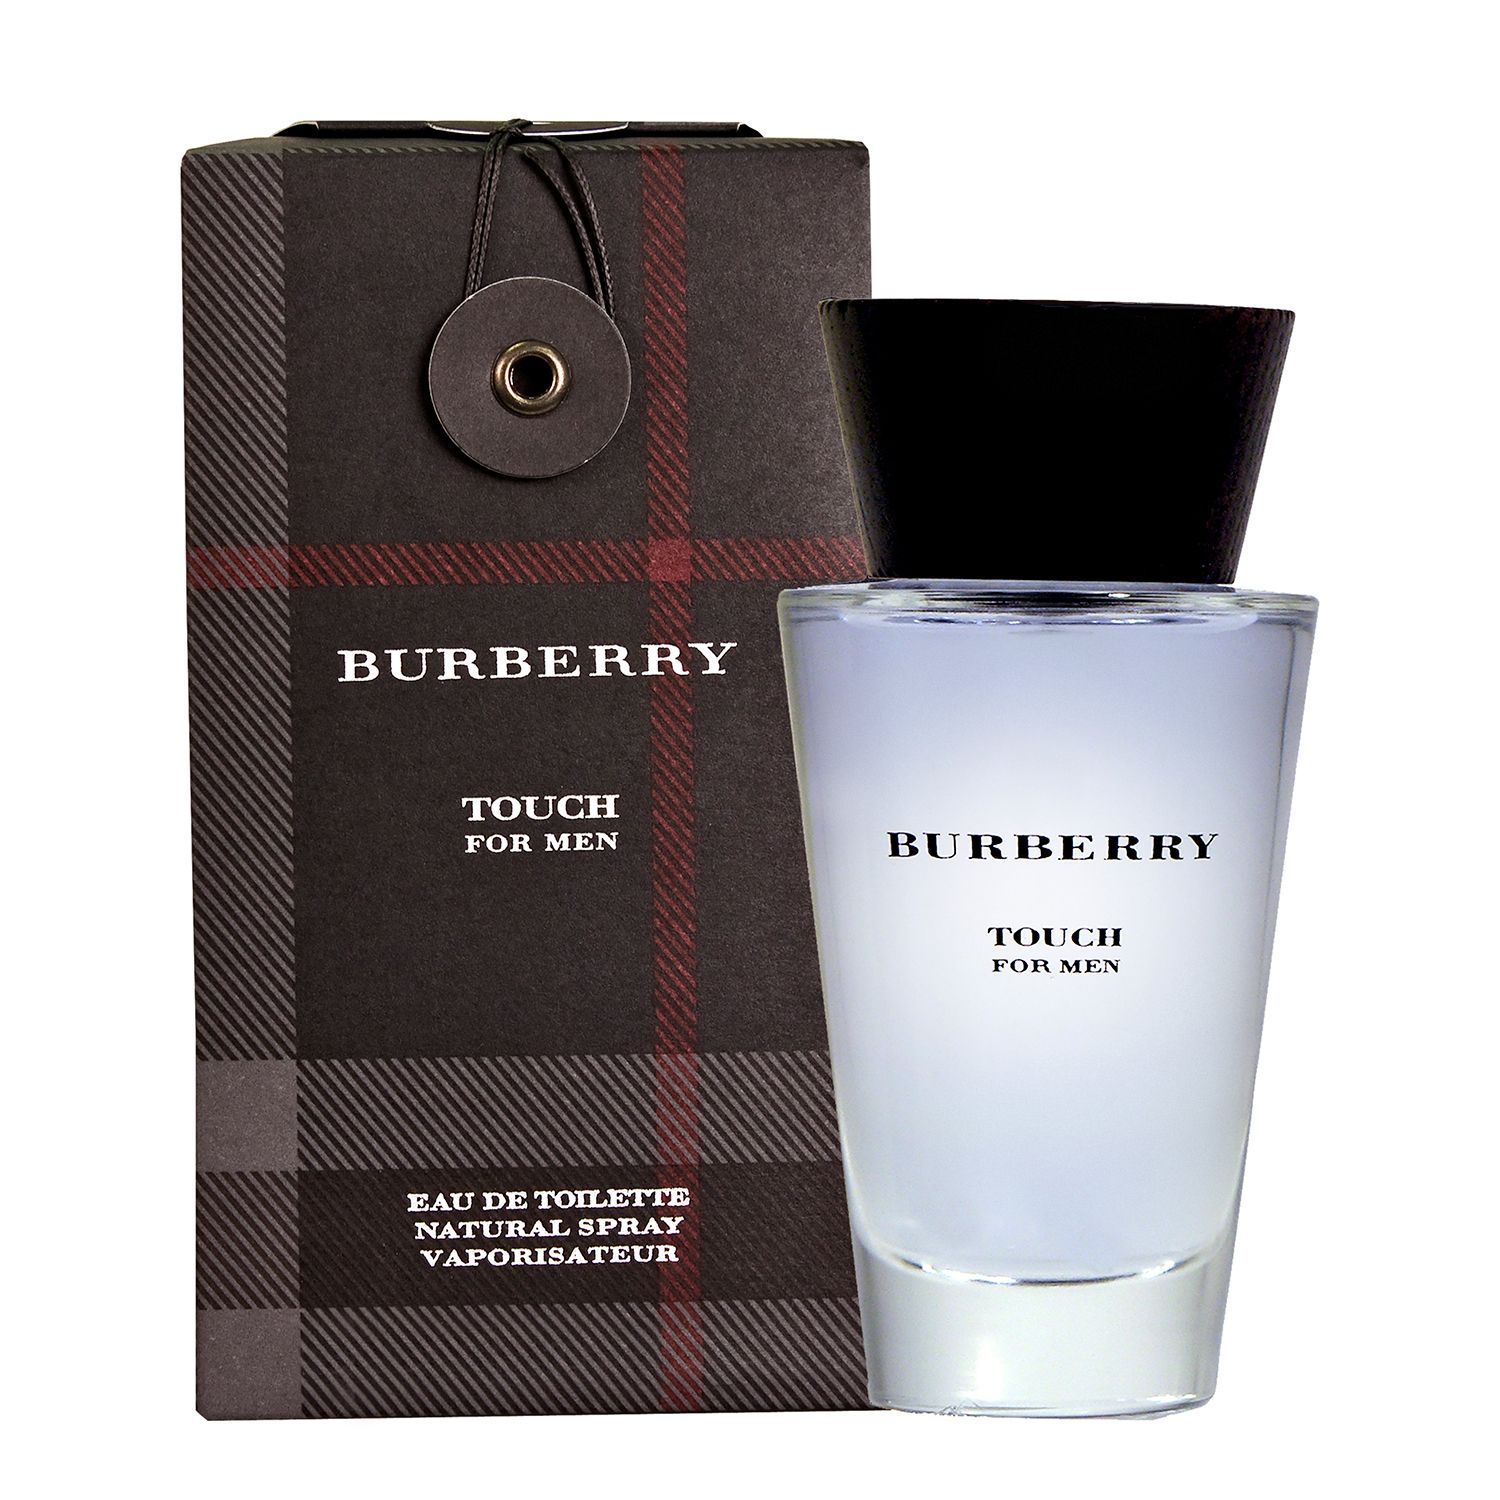 burberry cologne touch